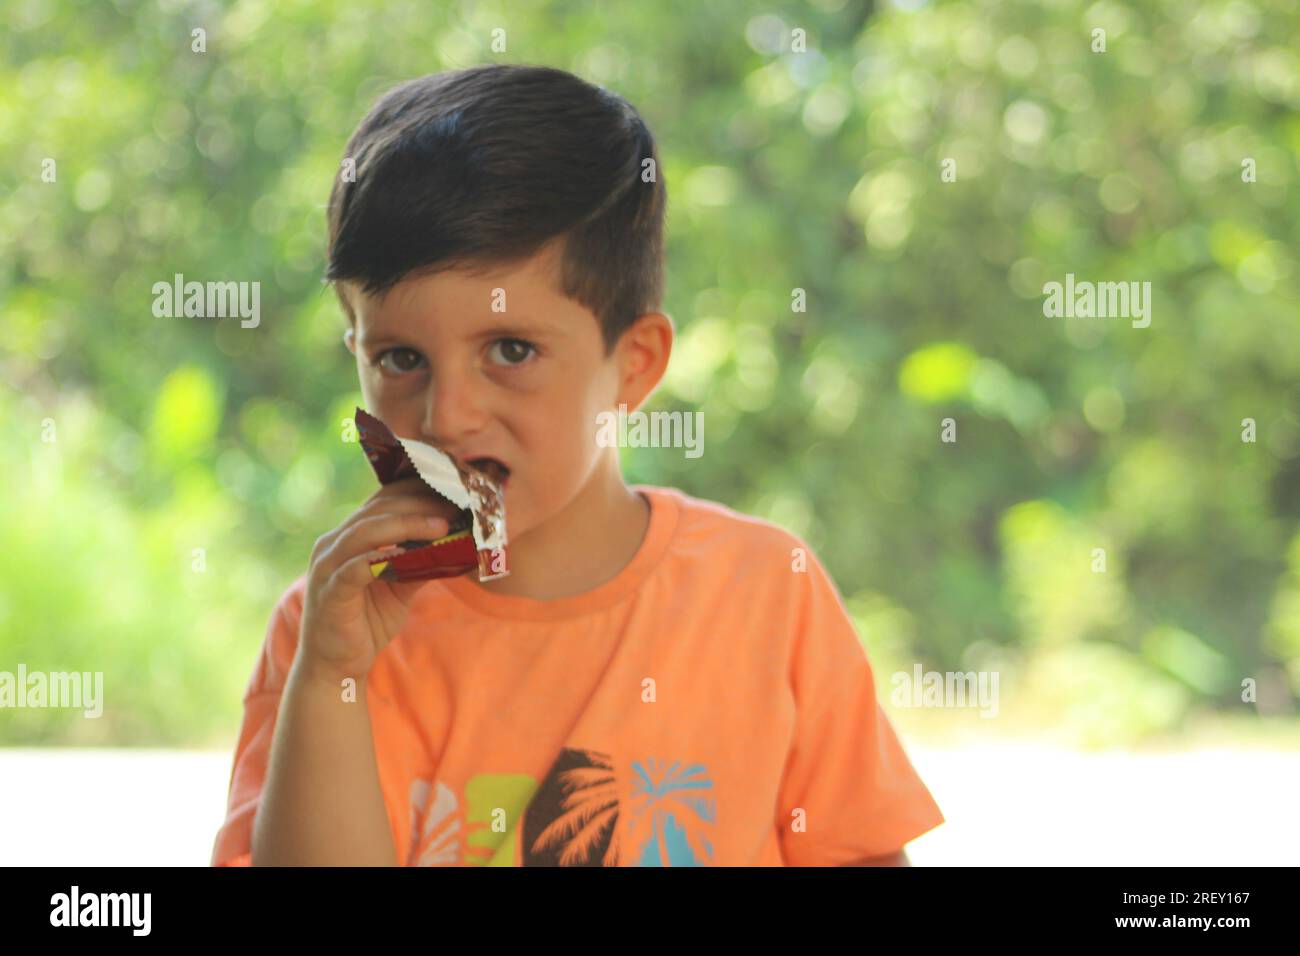 Boy eating chocolate covered wafer. Stock Photo